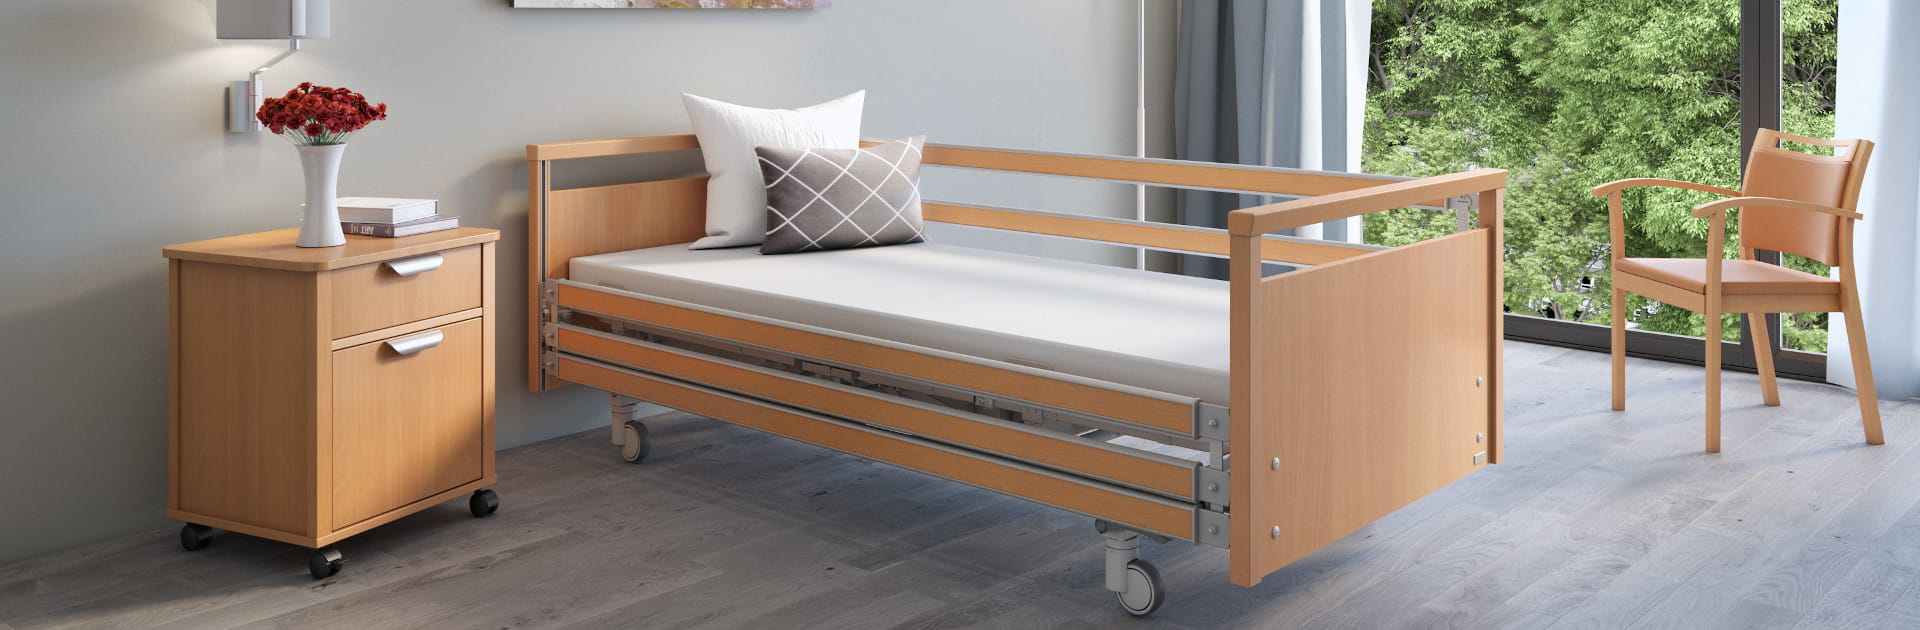 The washable variana nursing bed combines functionally flexible elements with economy and design.